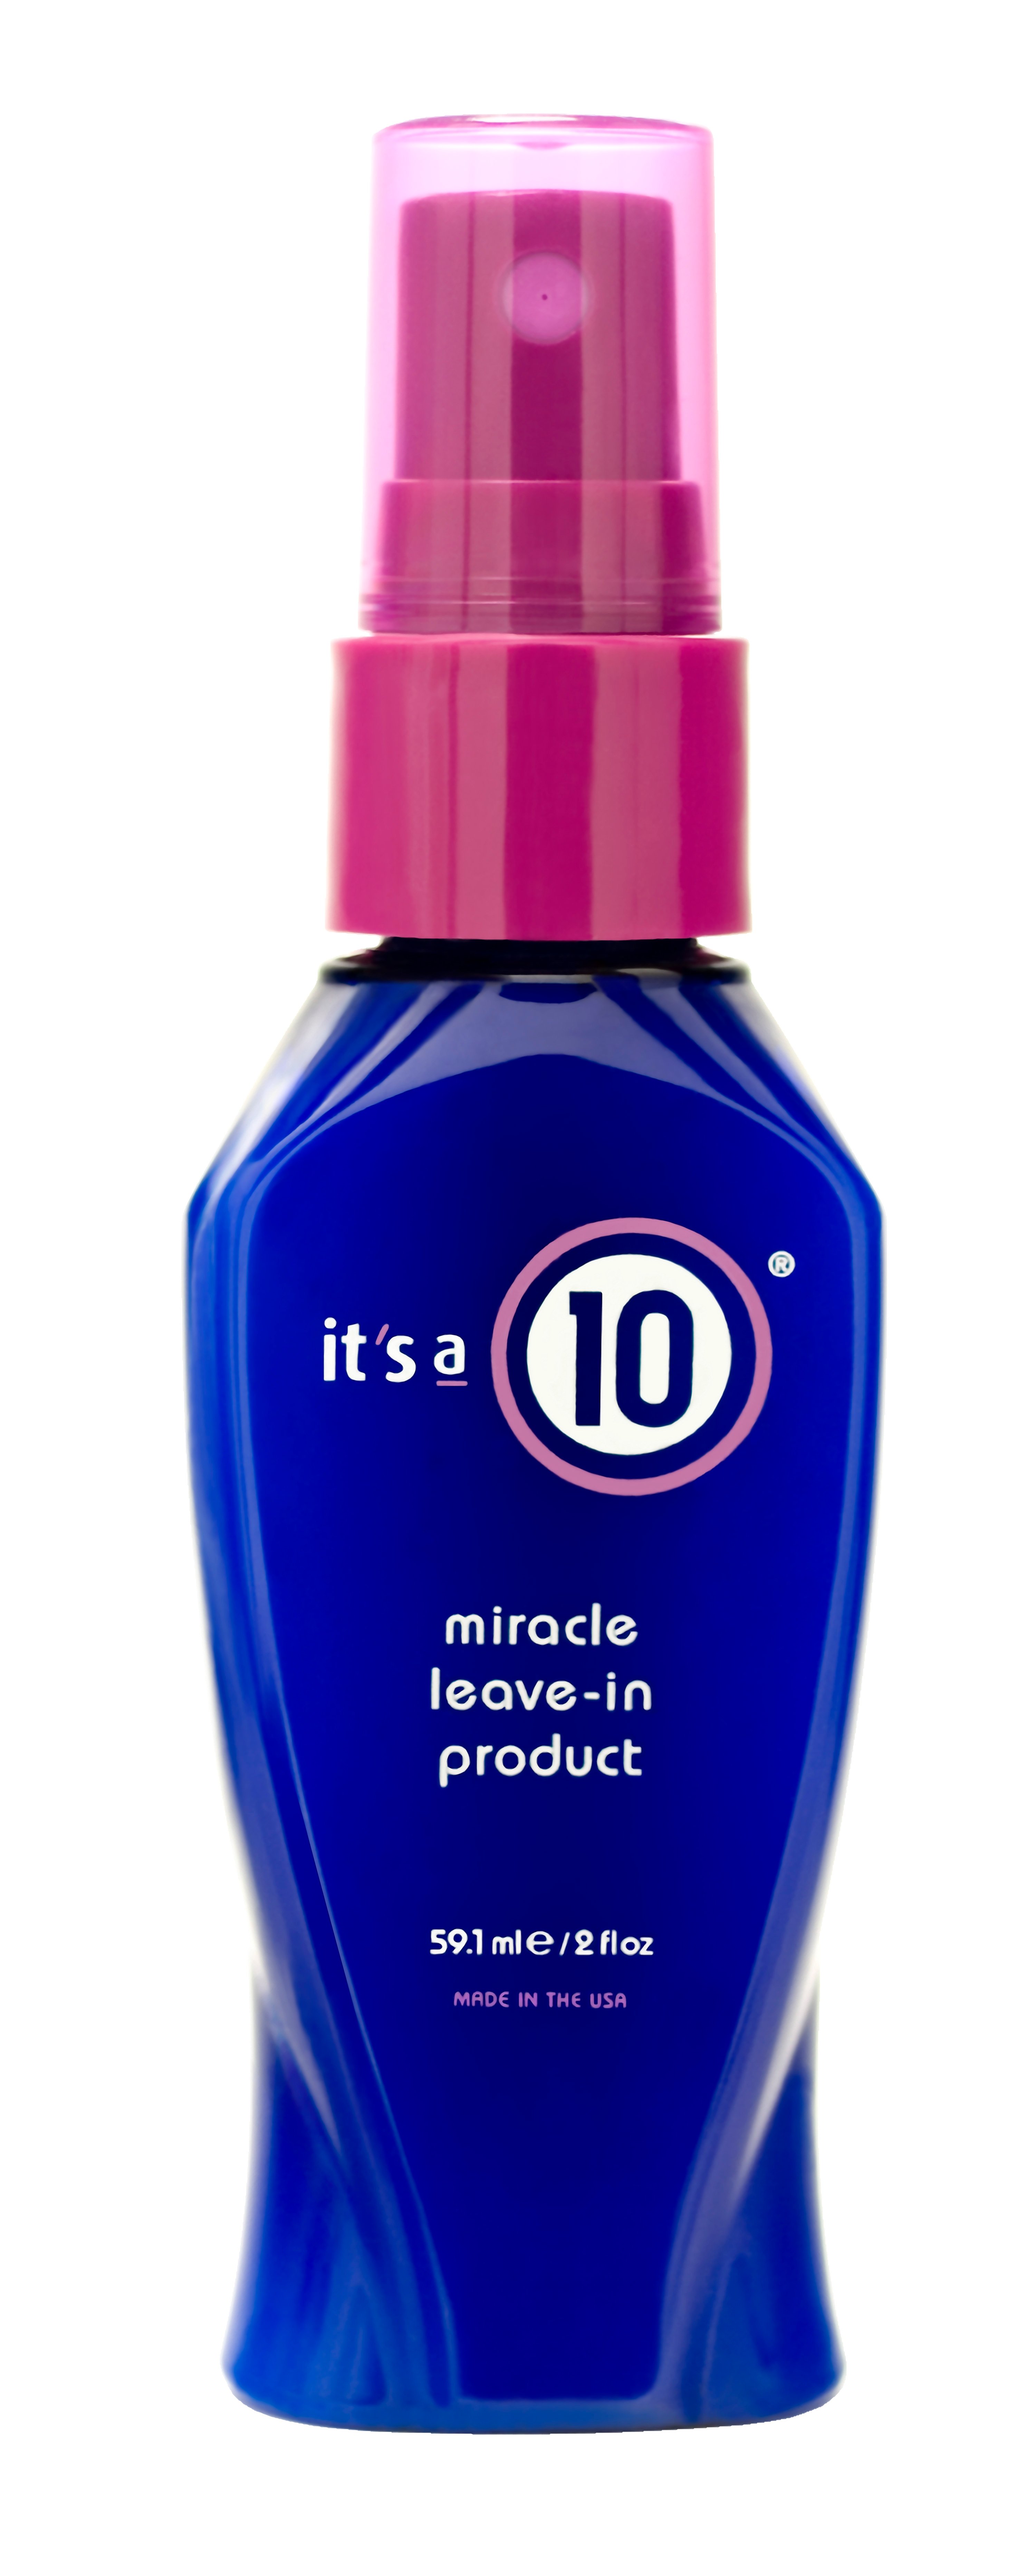 It's a 10 Miracle Leave-In Conditioner Spray Product